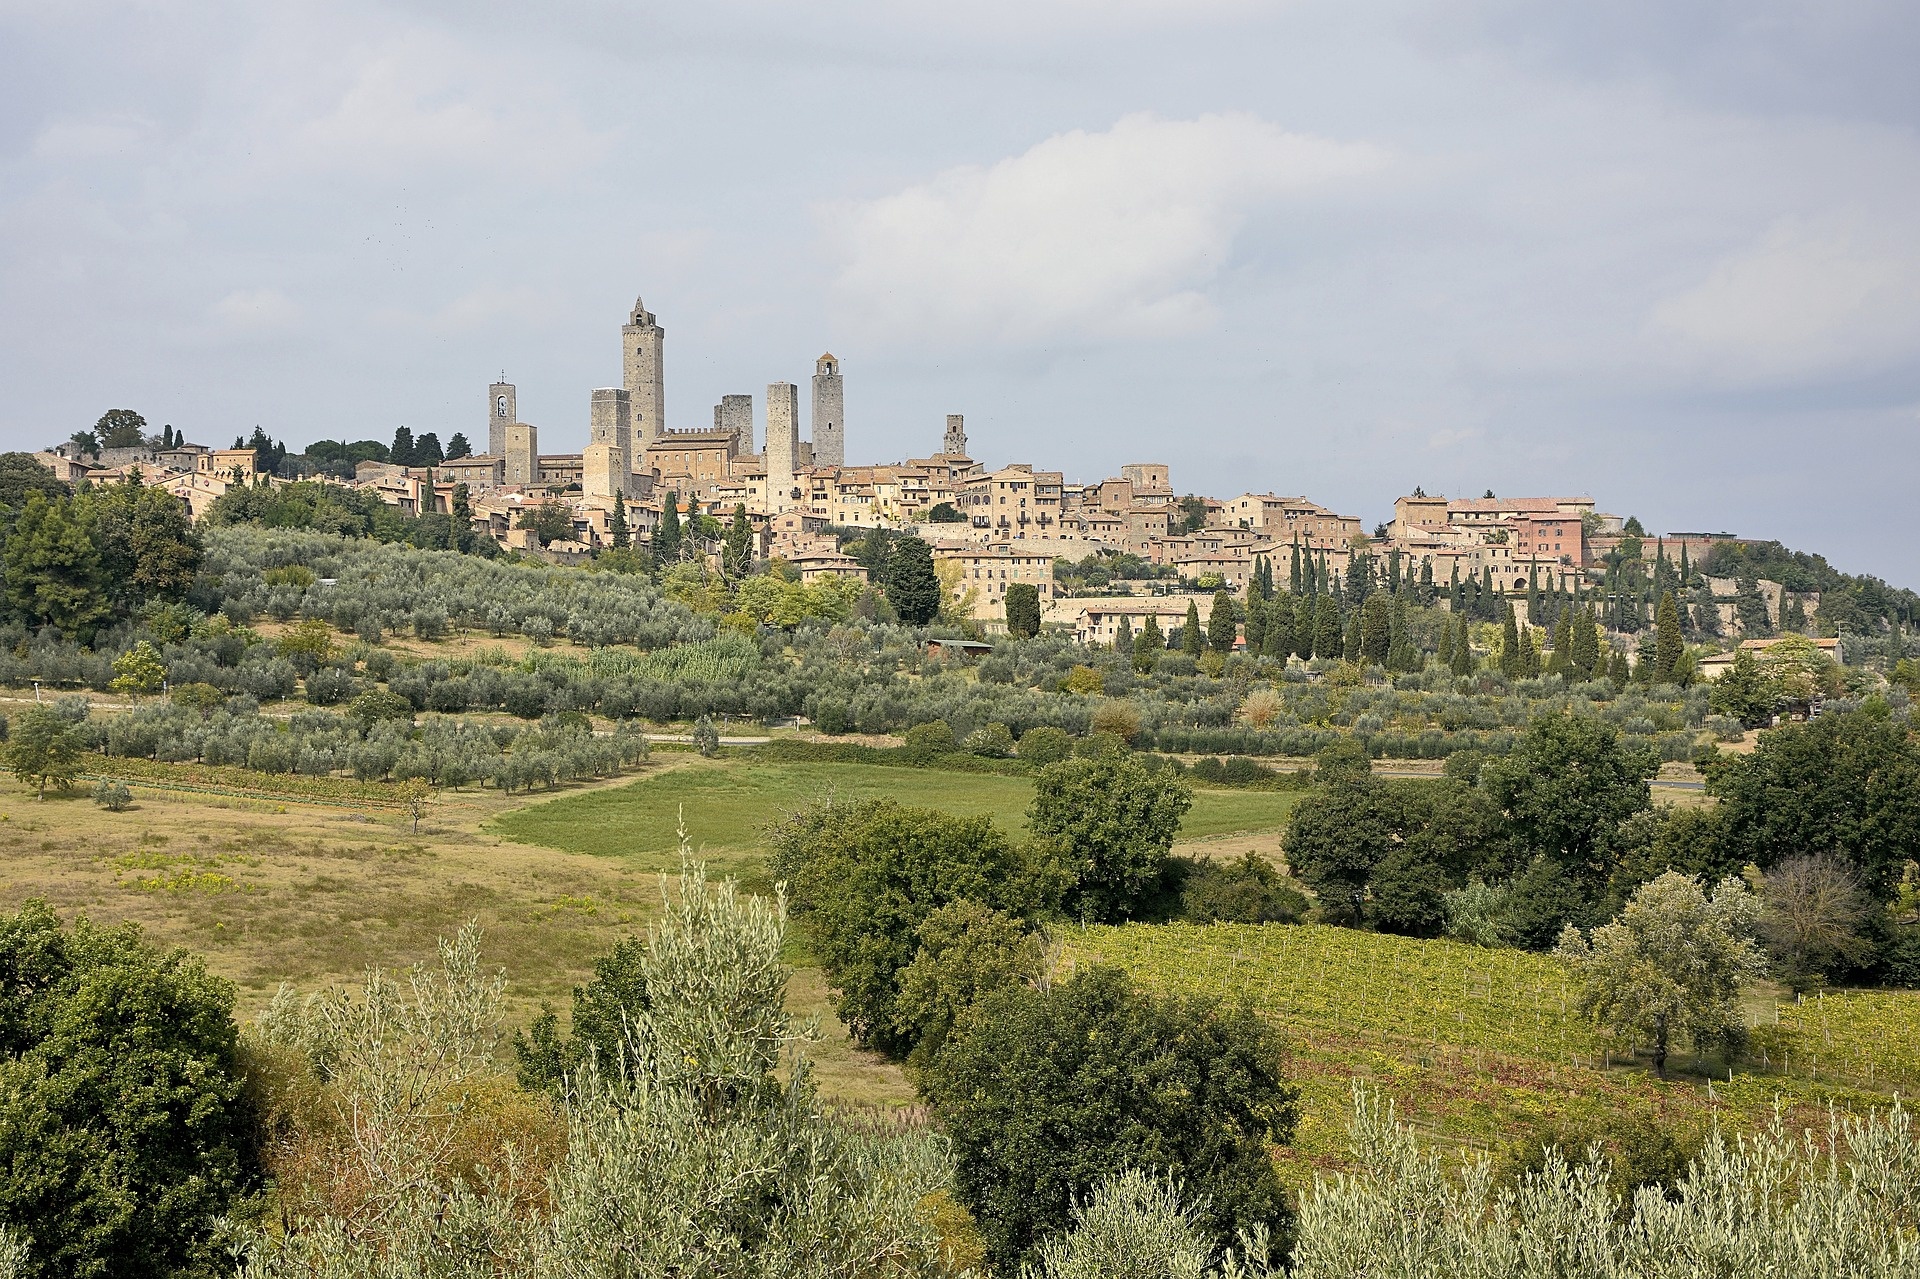 Active holiday in San Gimignano, Outdoor activities, Adventure travel, Exciting experiences, 1920x1280 HD Desktop